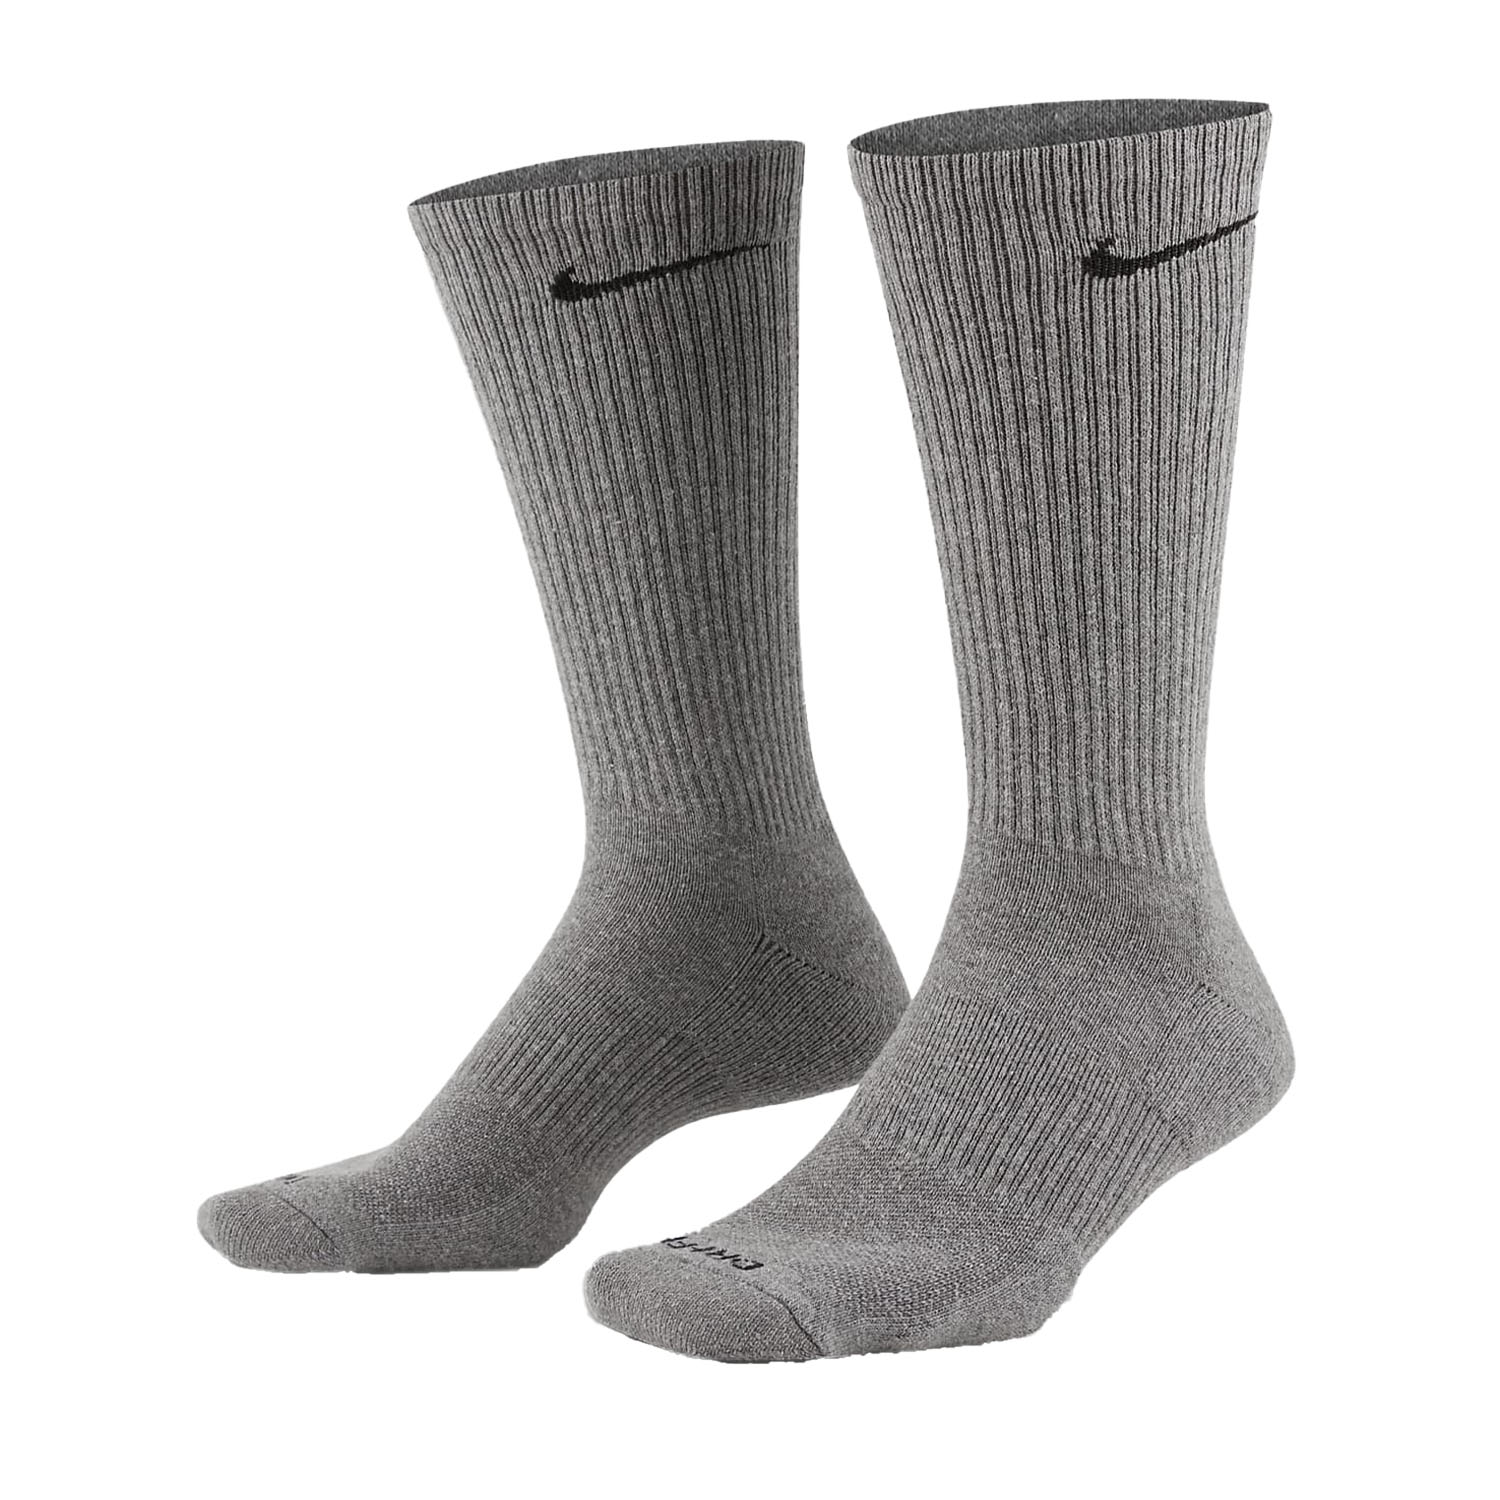 Nike Everyday Plus Cushioned x 6 Calze - Carbon Heather/Black